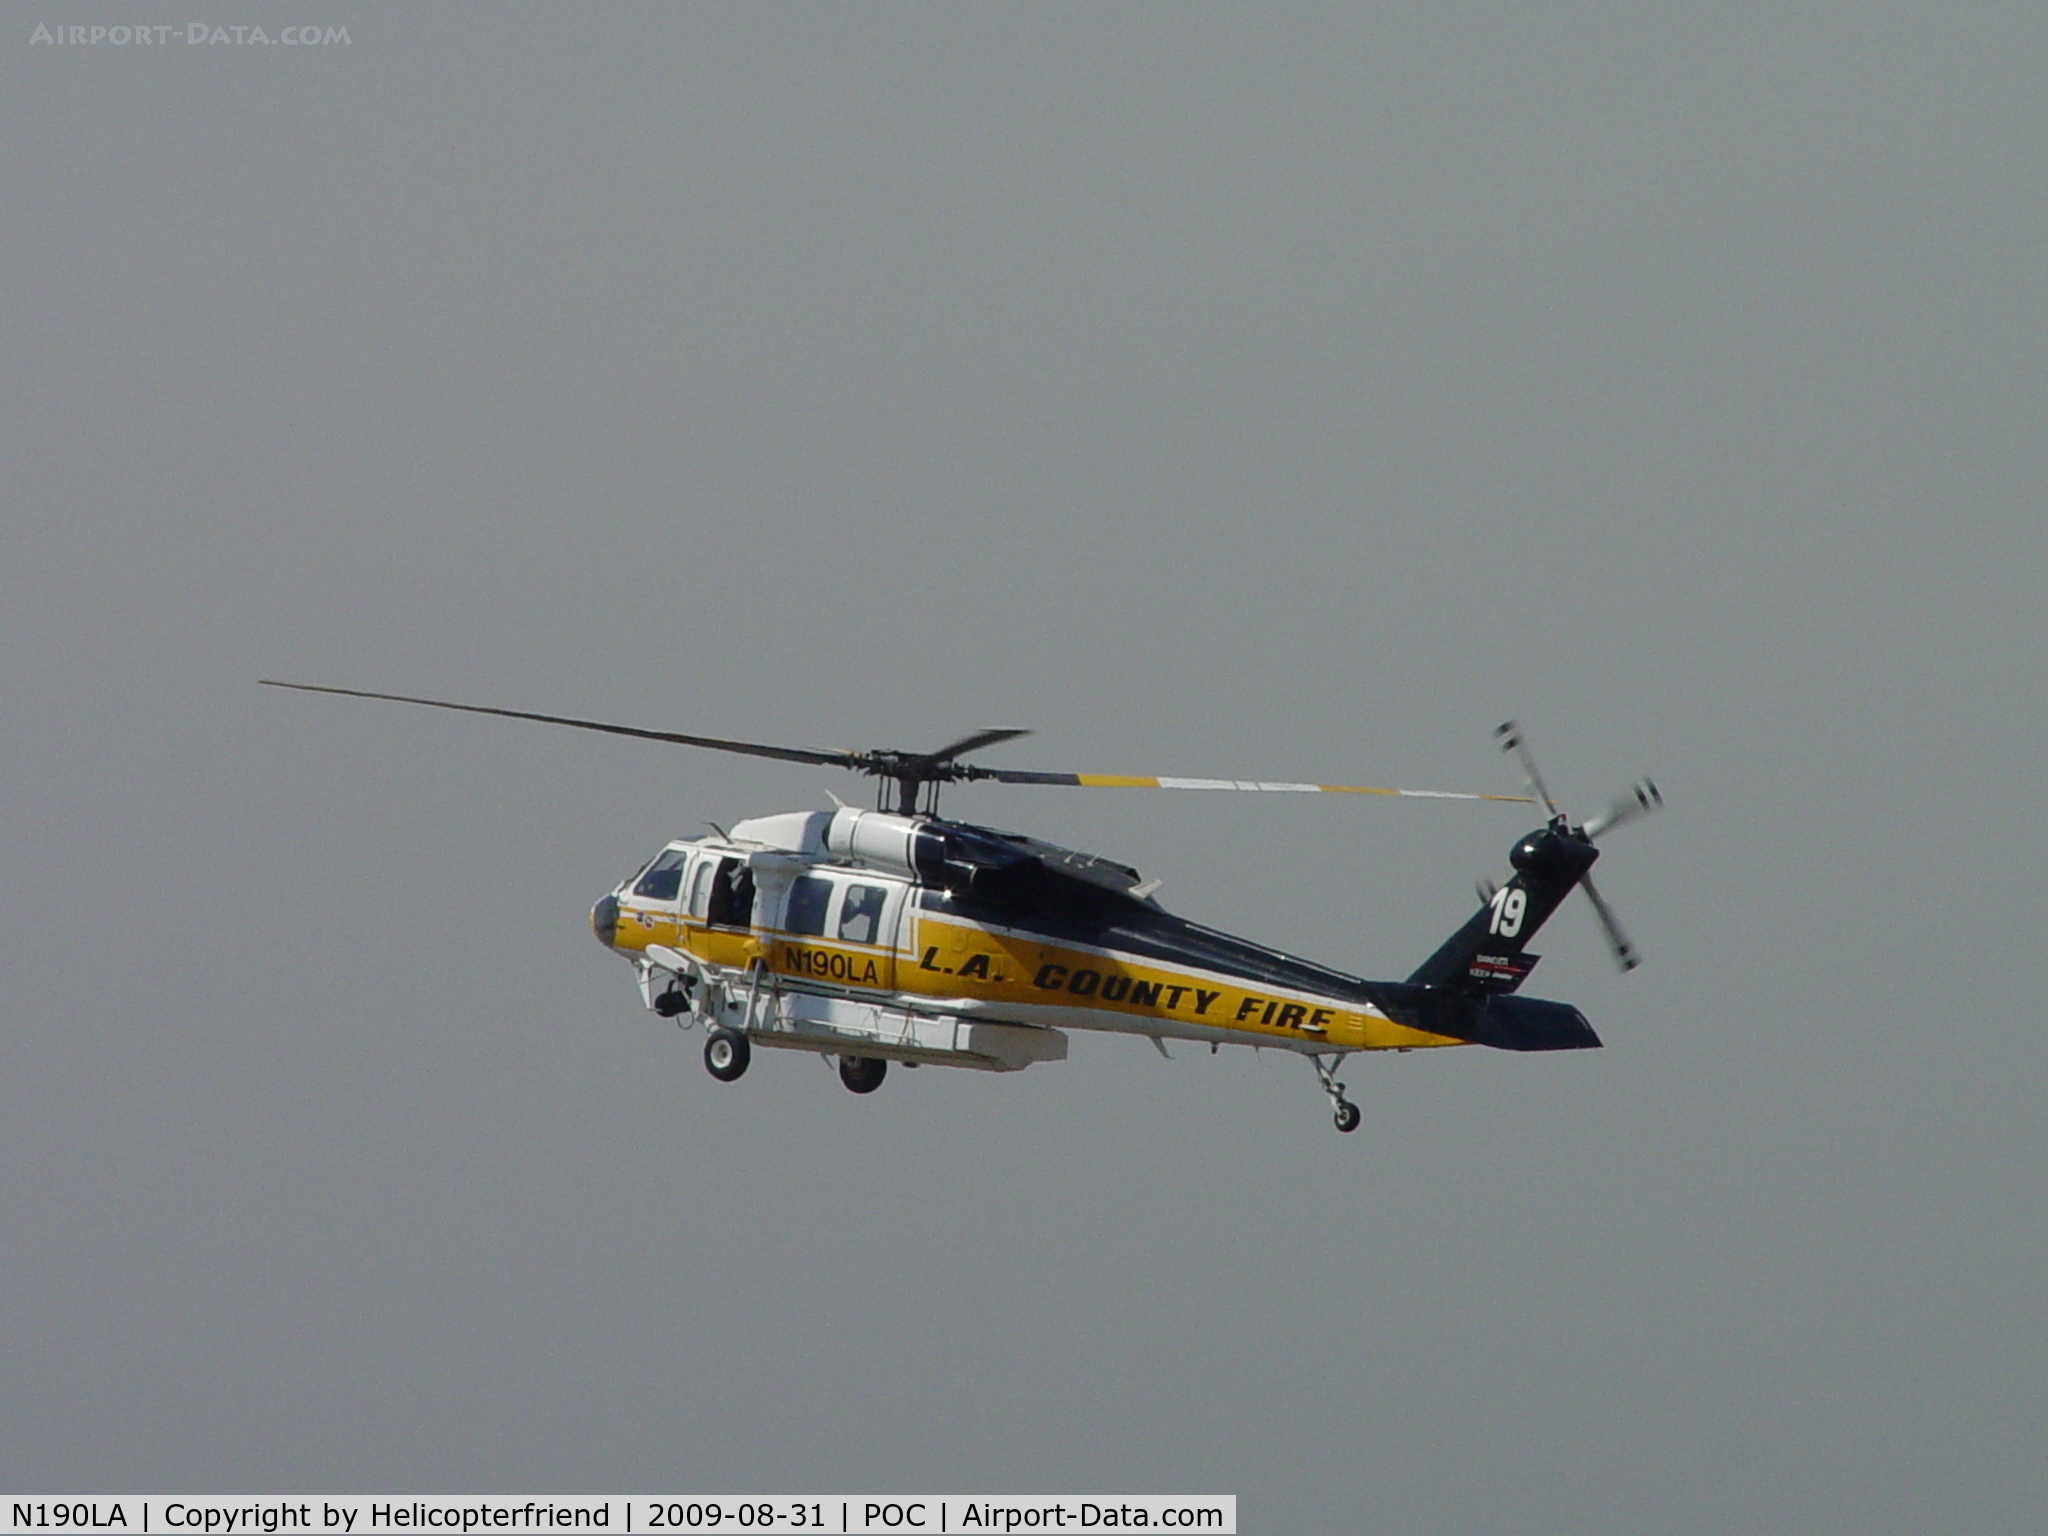 N190LA, Sikorsky S-70A Firehawk C/N 702479, Slowing down to land and taxi to EHA for fuel